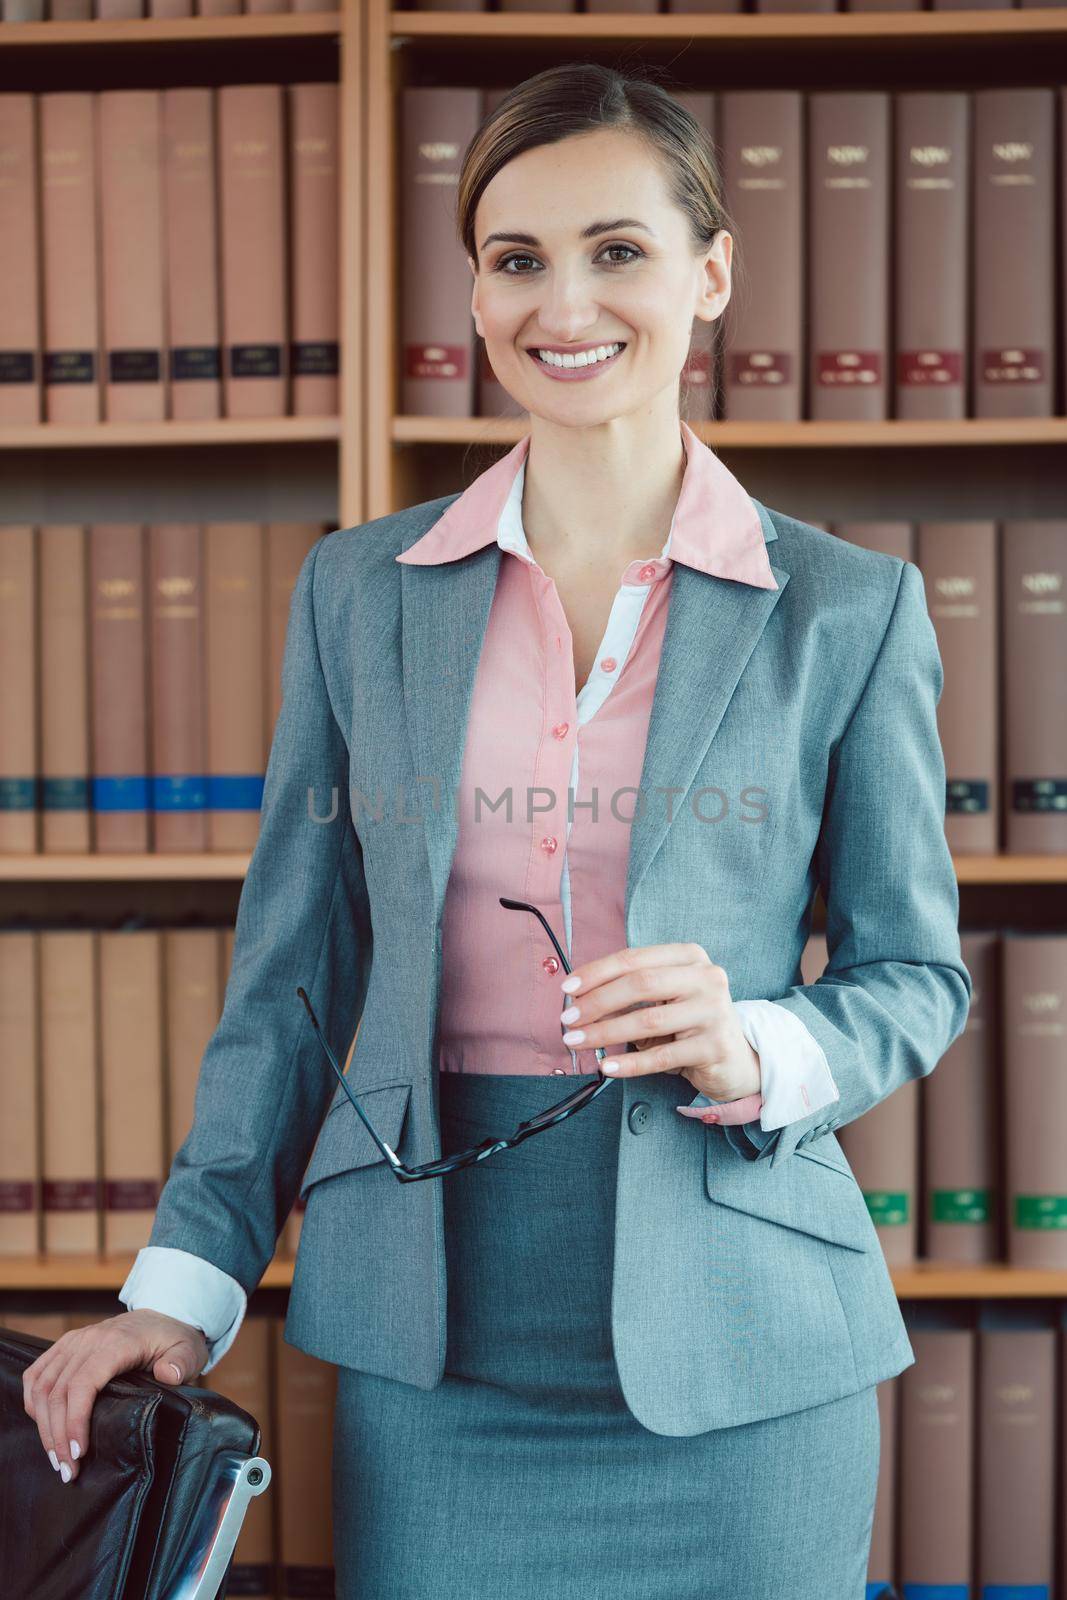 Attorney at law in her office in front of book shelf in the library